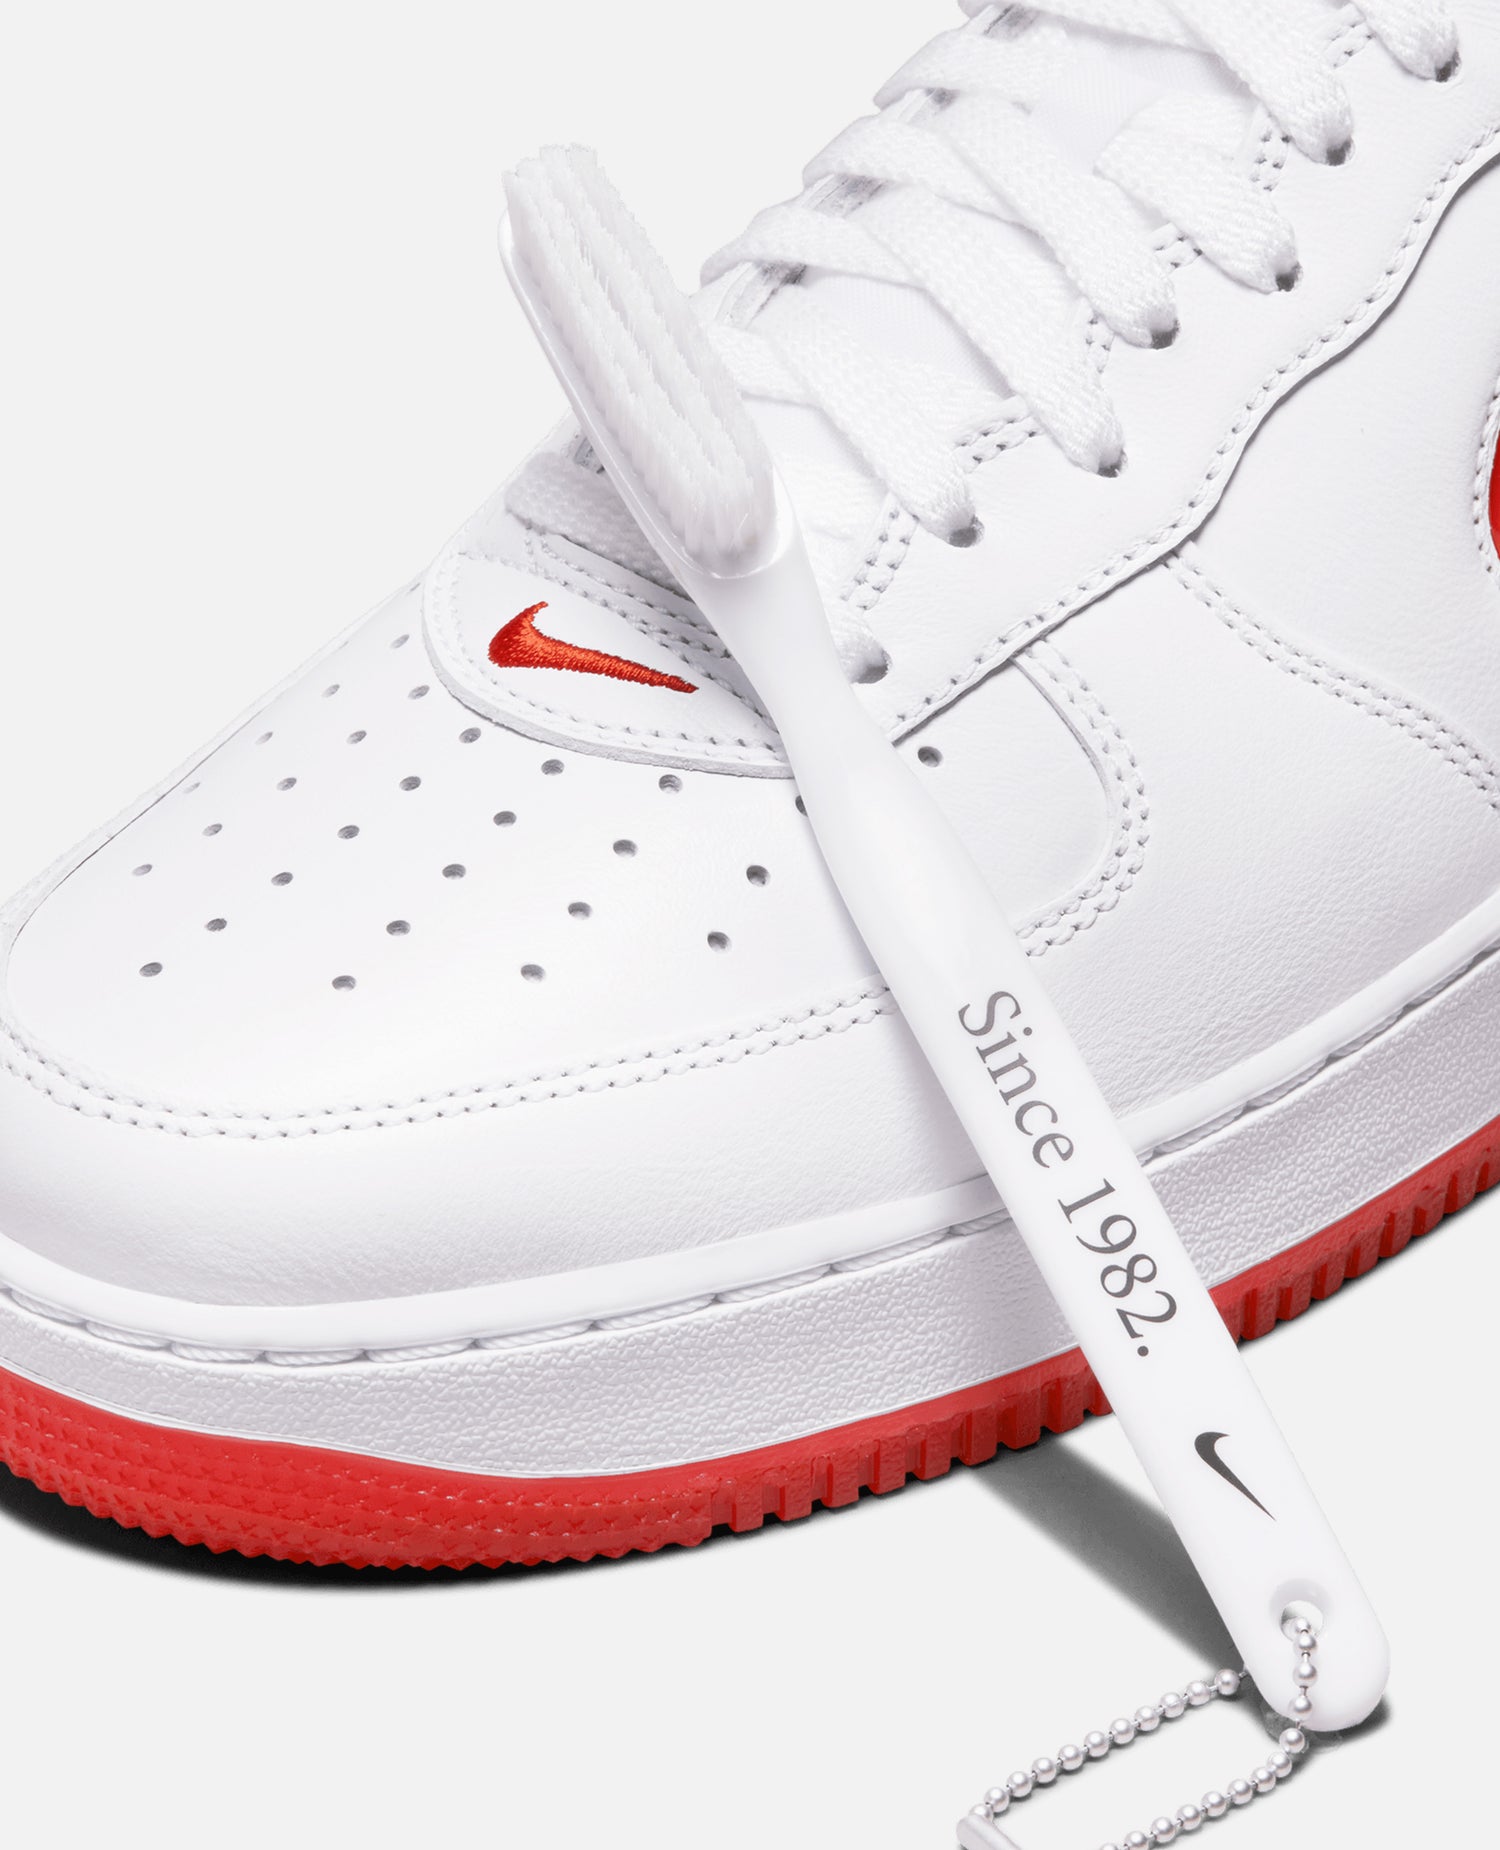 Nike Air Force 1 Low Retro (White/University Red)